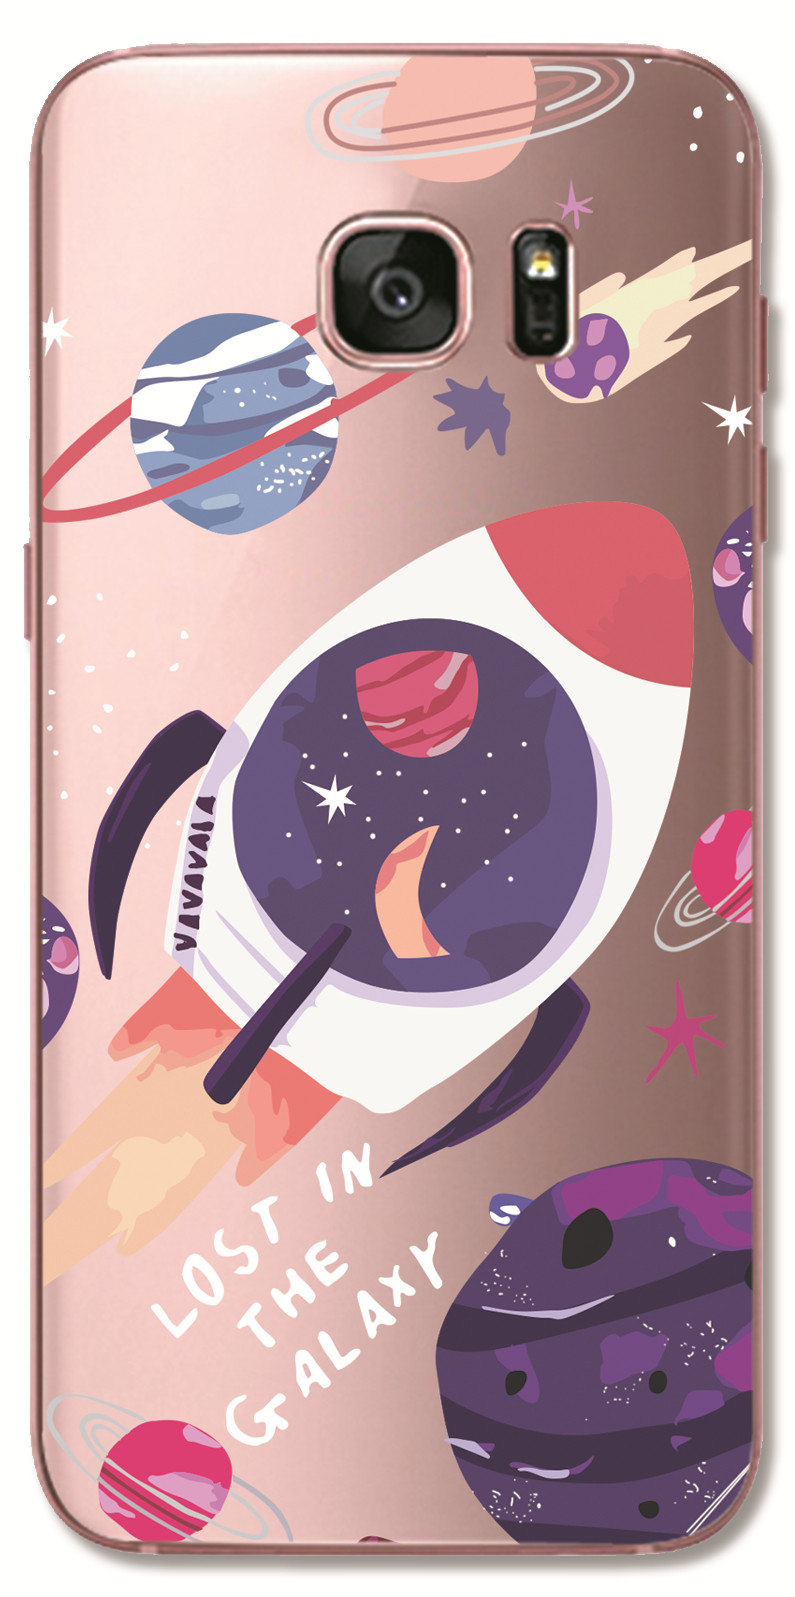 Samsung Galaxy S5 S7 S6 Edge Plus INS Cute Cartoon Big eyes furry Monster Clear Soft Silicone TPU Phone Casing Lovely Space Astronaut Spaceship Case Back Cover Couple